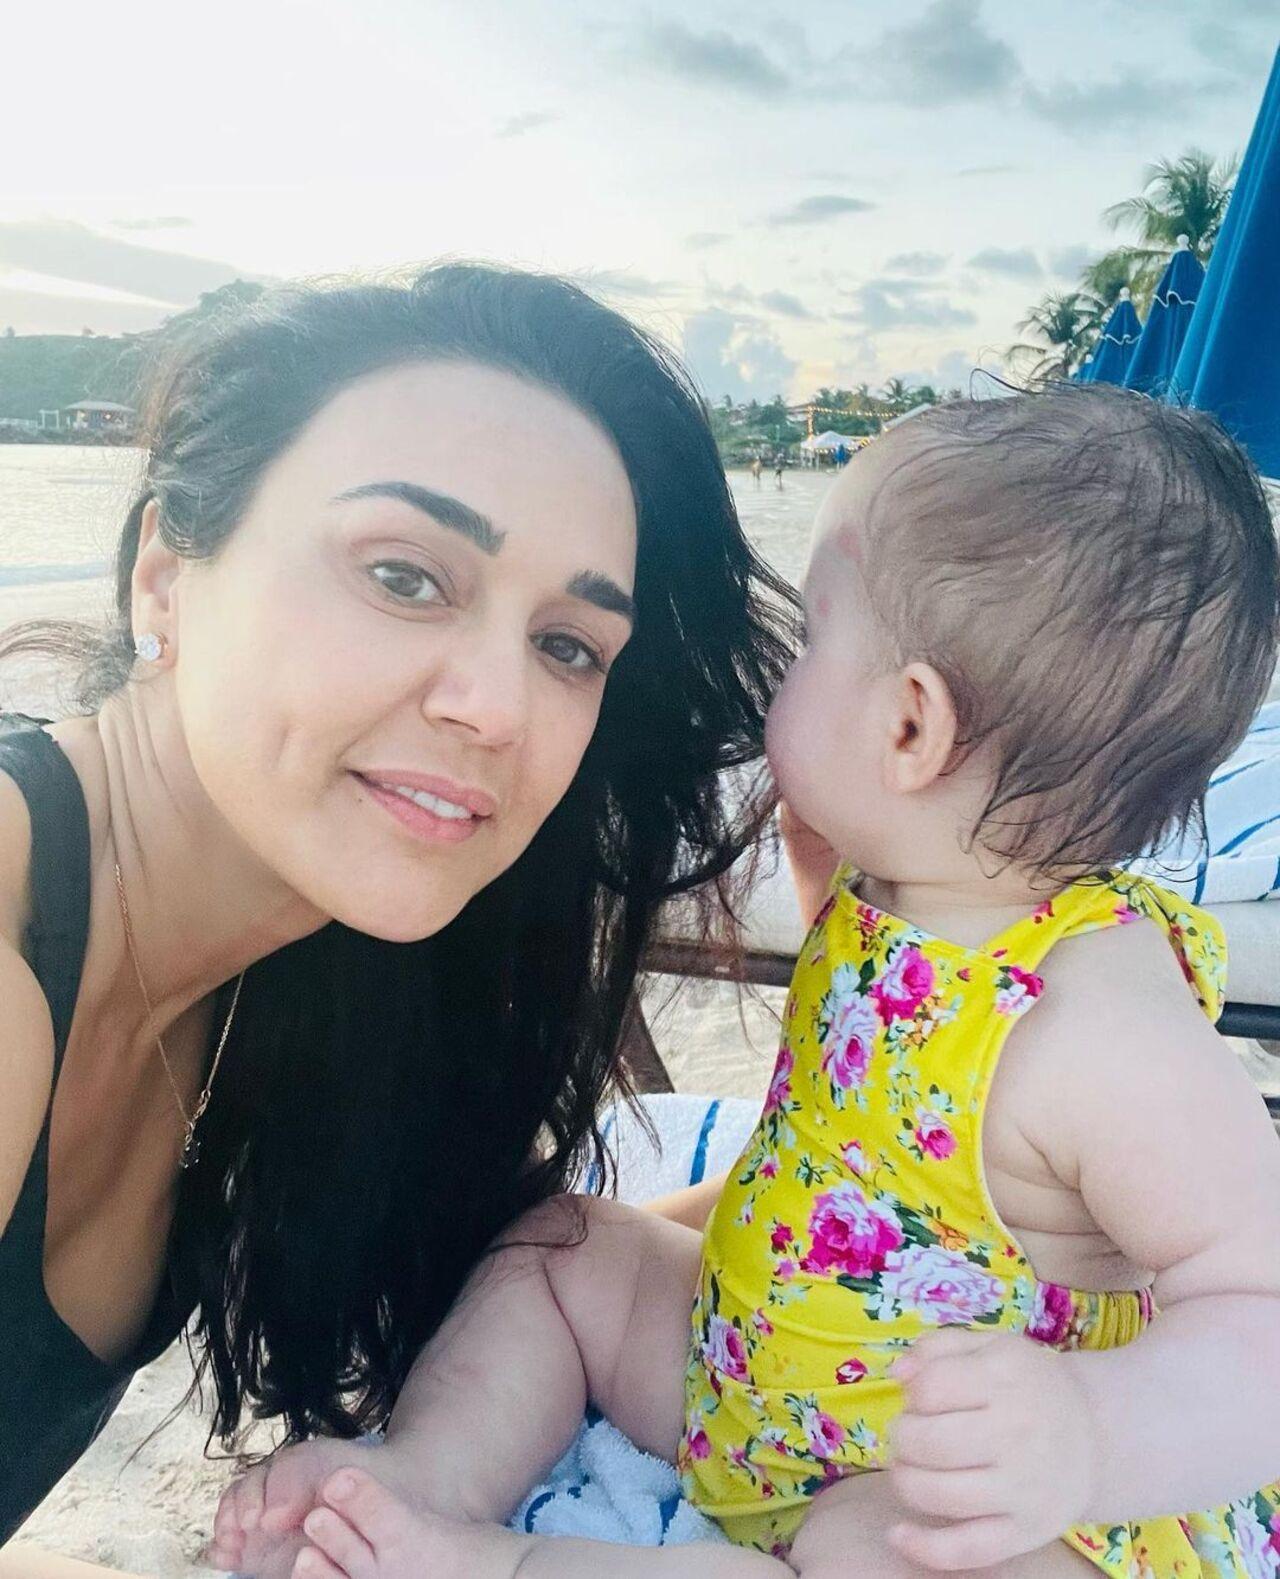 Gia Goodenough
Gia Goodenough is Preity Zinta and Gene Goodenough's daughter. She has a twin brother named Jai. They were born via surrogacy in 2021